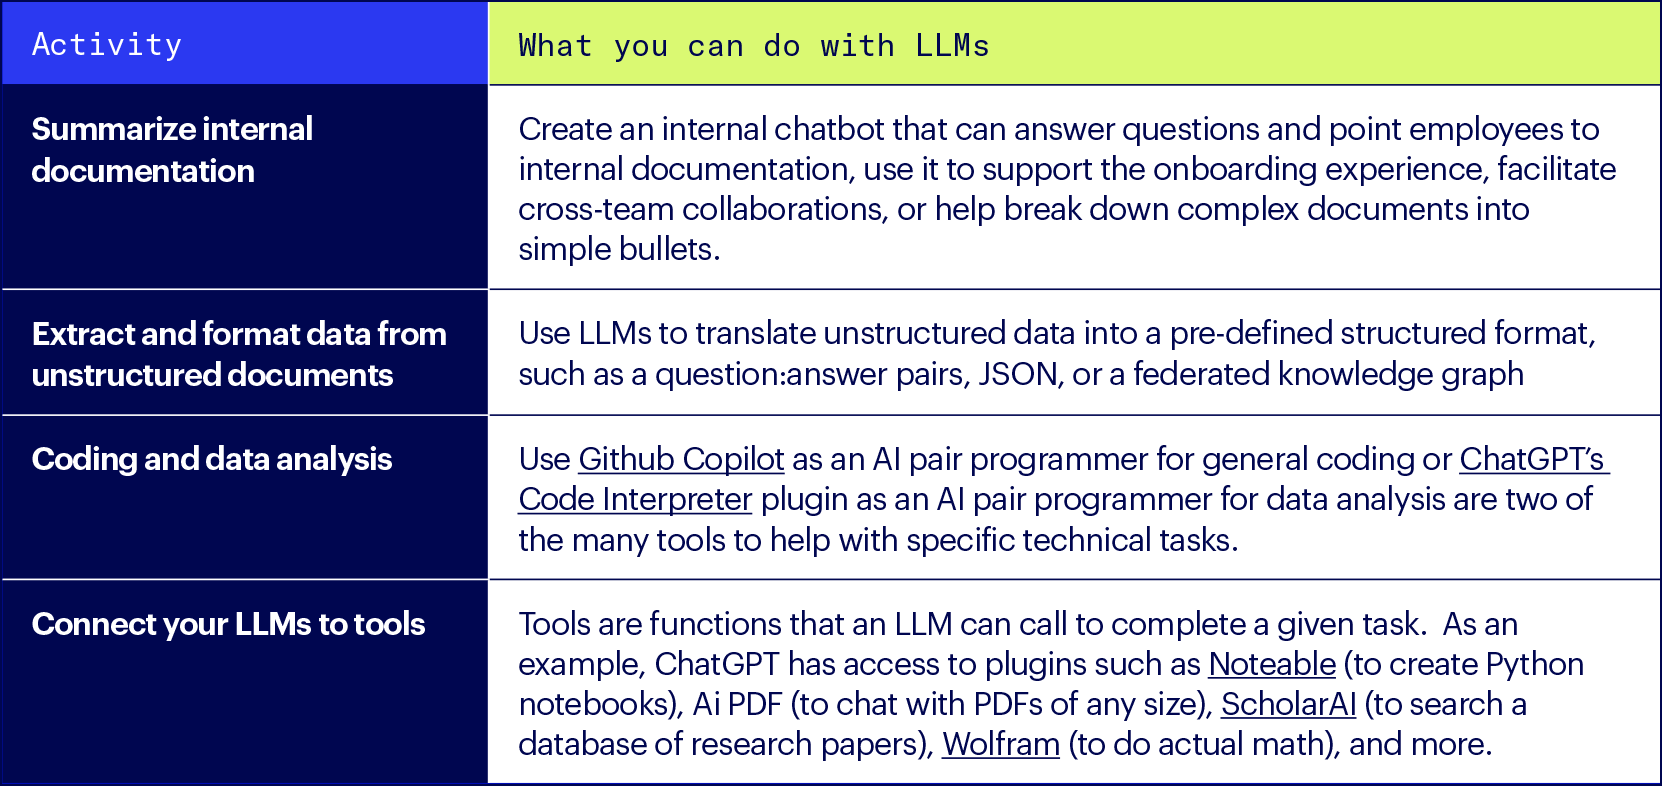 Summary of activities you can do with LLMs